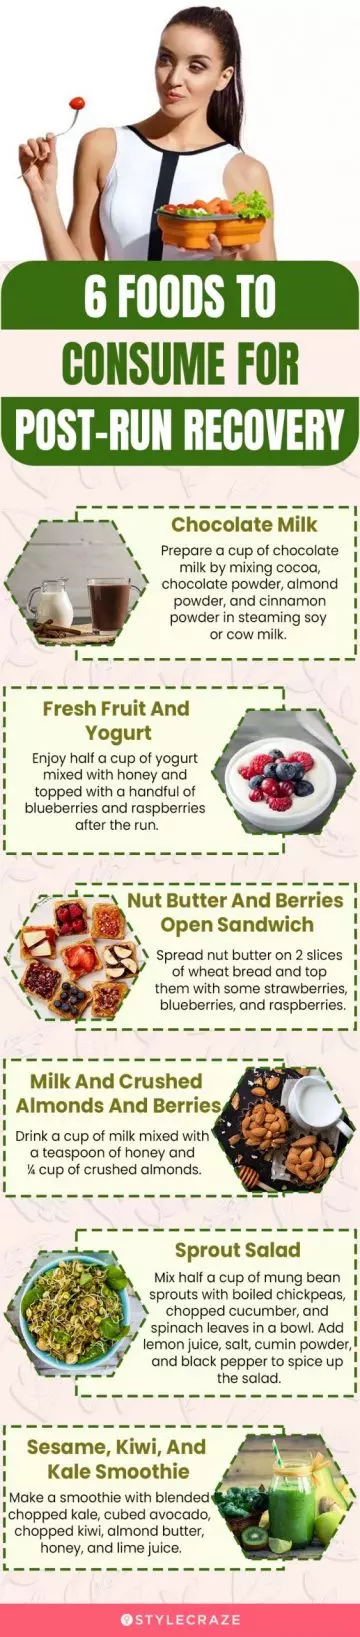 6 foods to consume for postrun recovery (infographic)